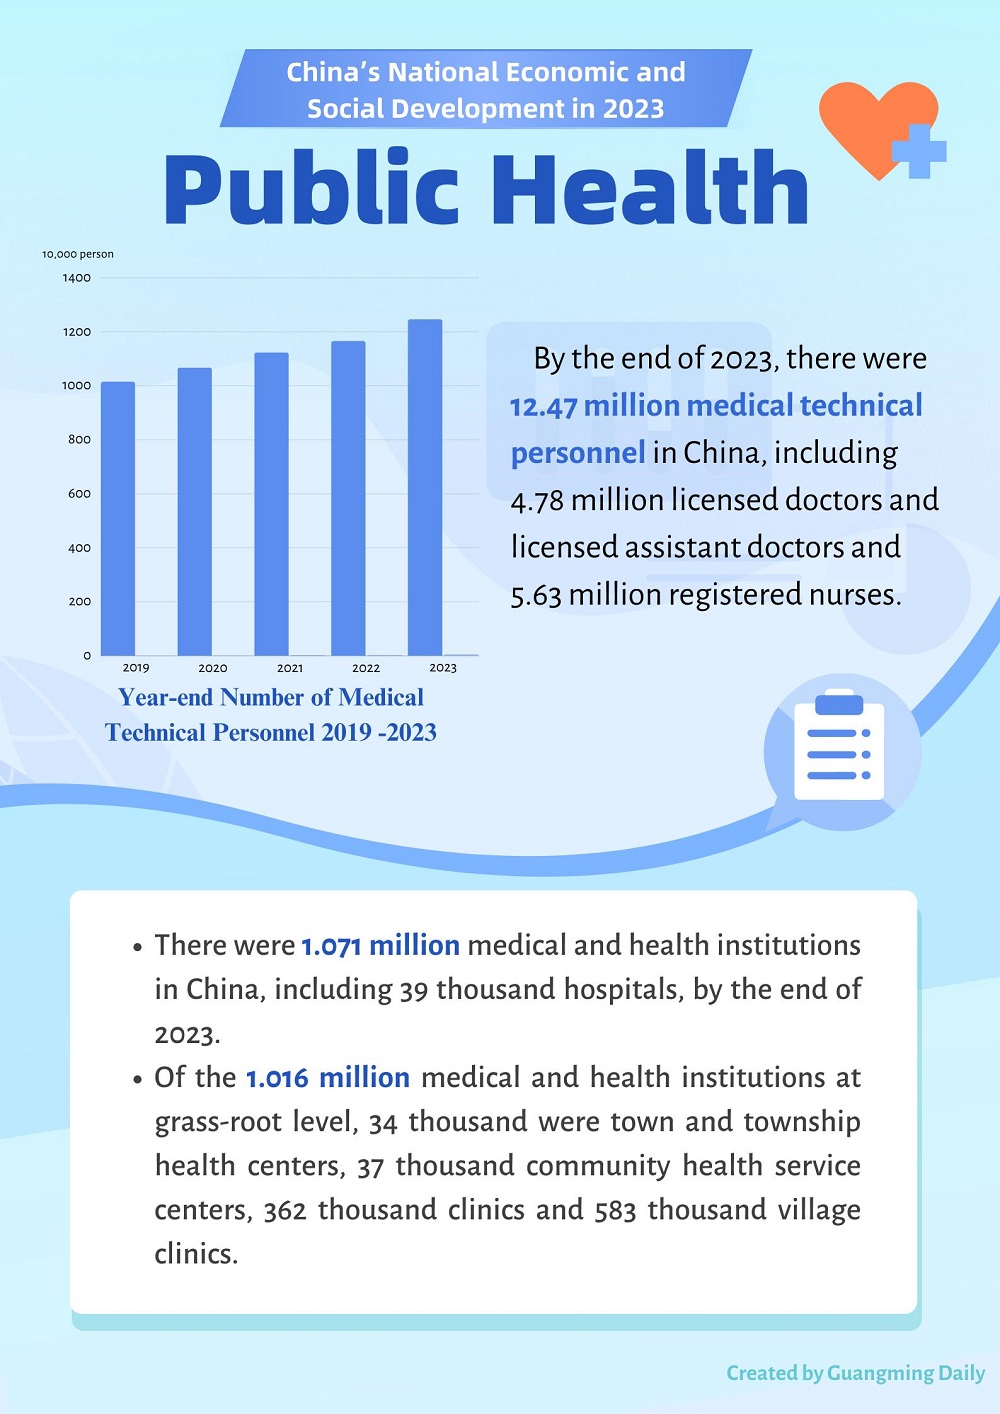 China's National Economic and Social Development in 2023: Public Health